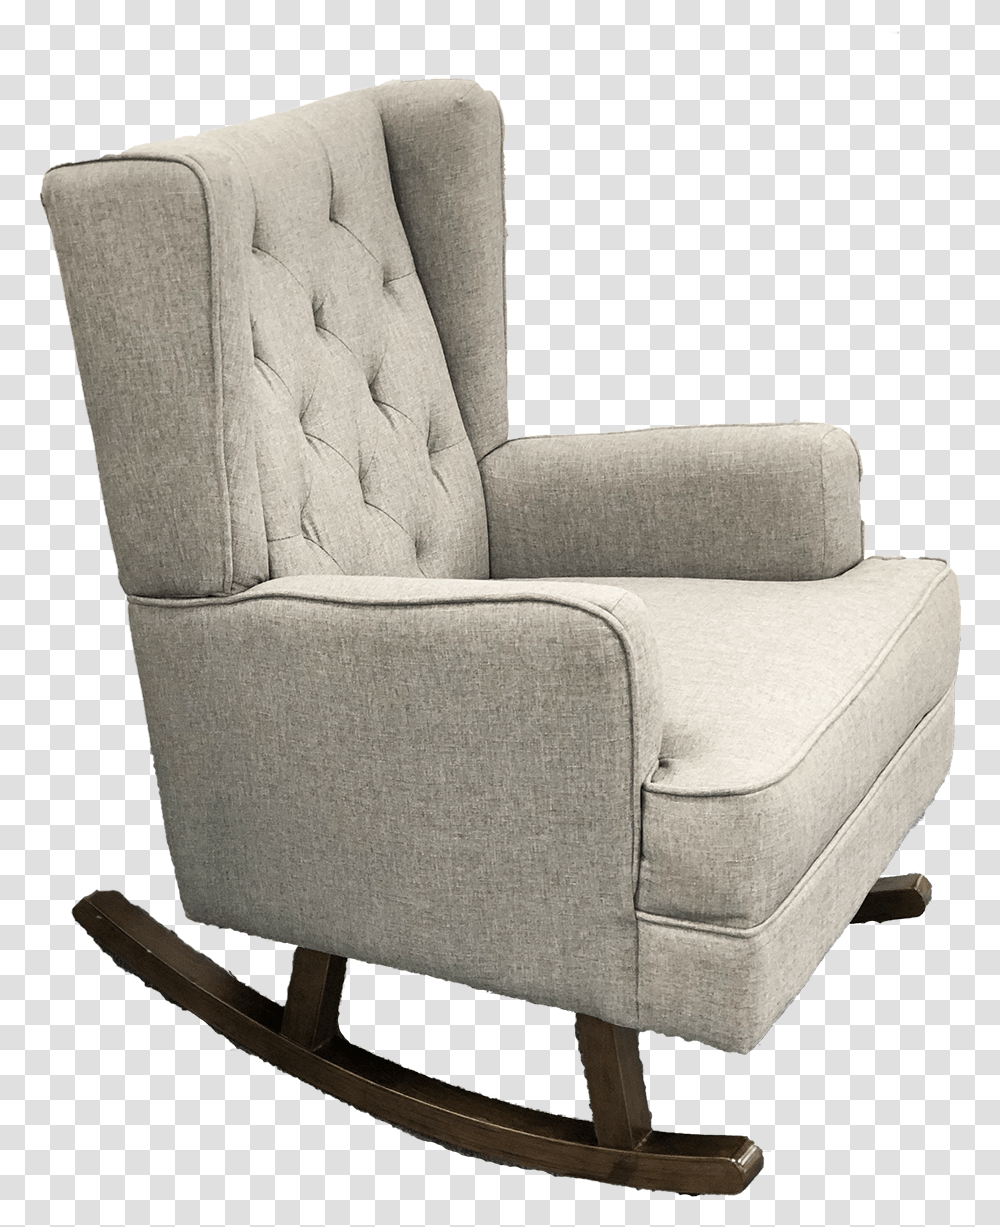 Boston Nursery Rocking Chair Baby Rocking Chairs, Furniture, Armchair Transparent Png